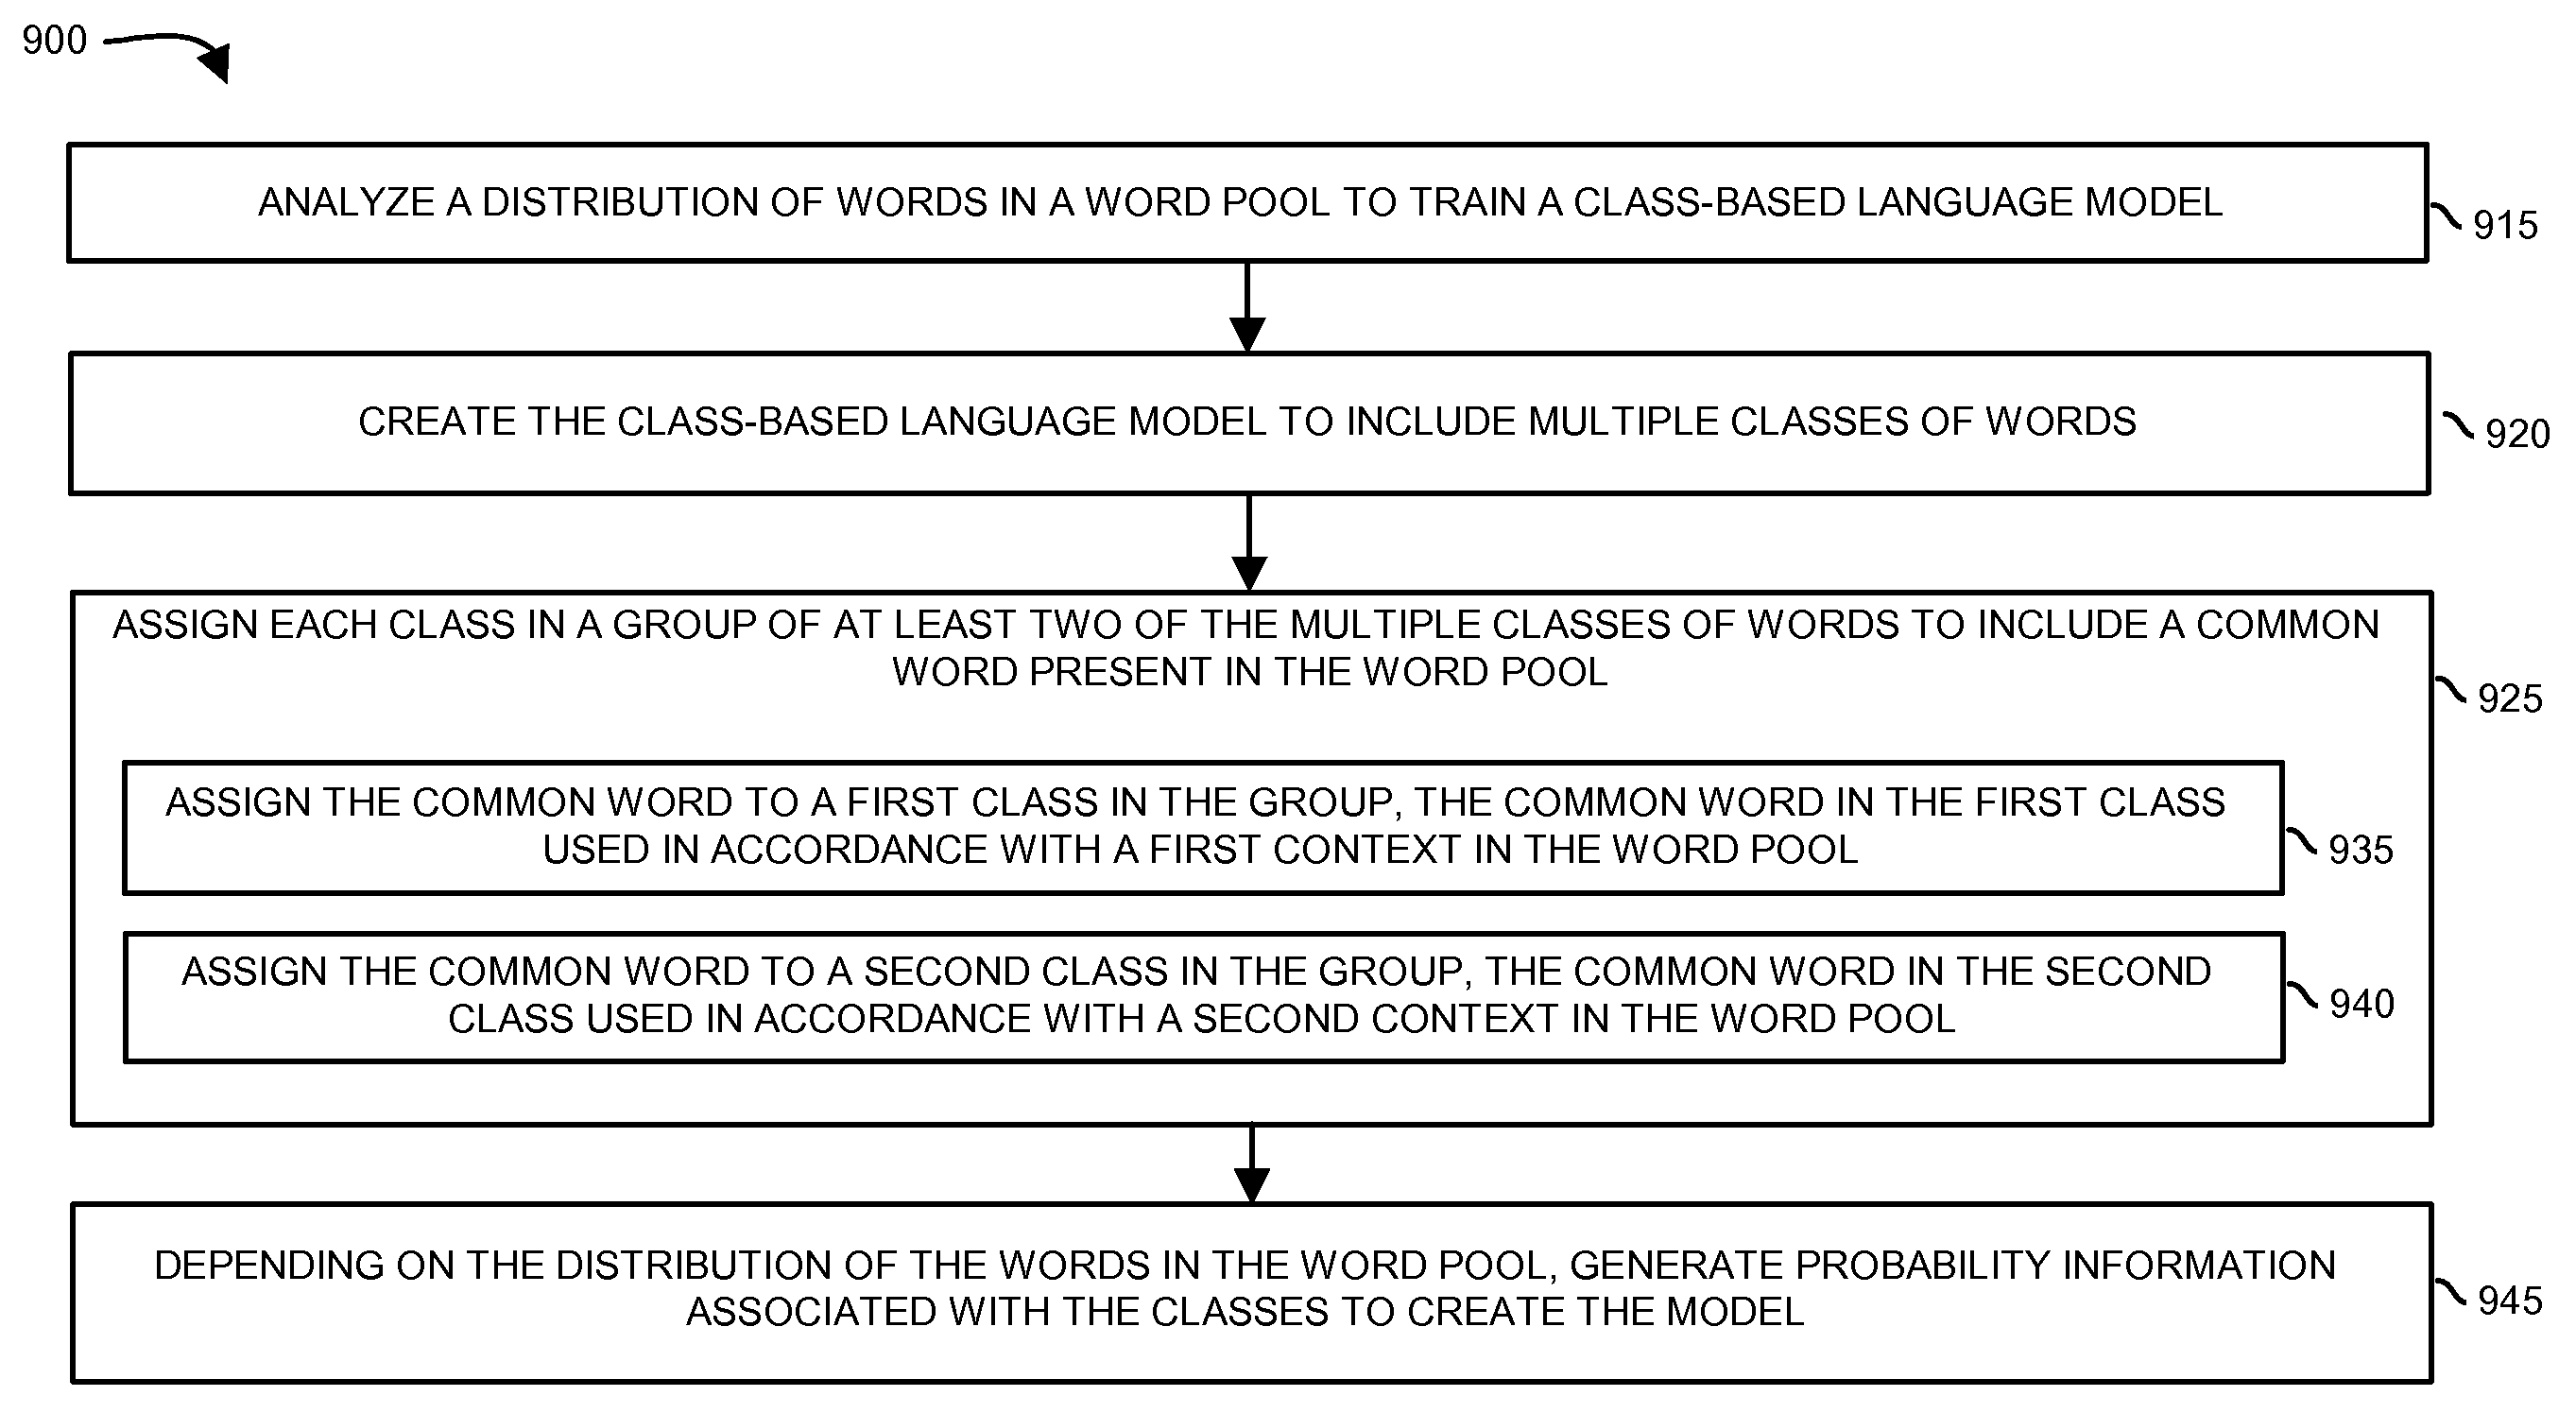 Class-based language model and use